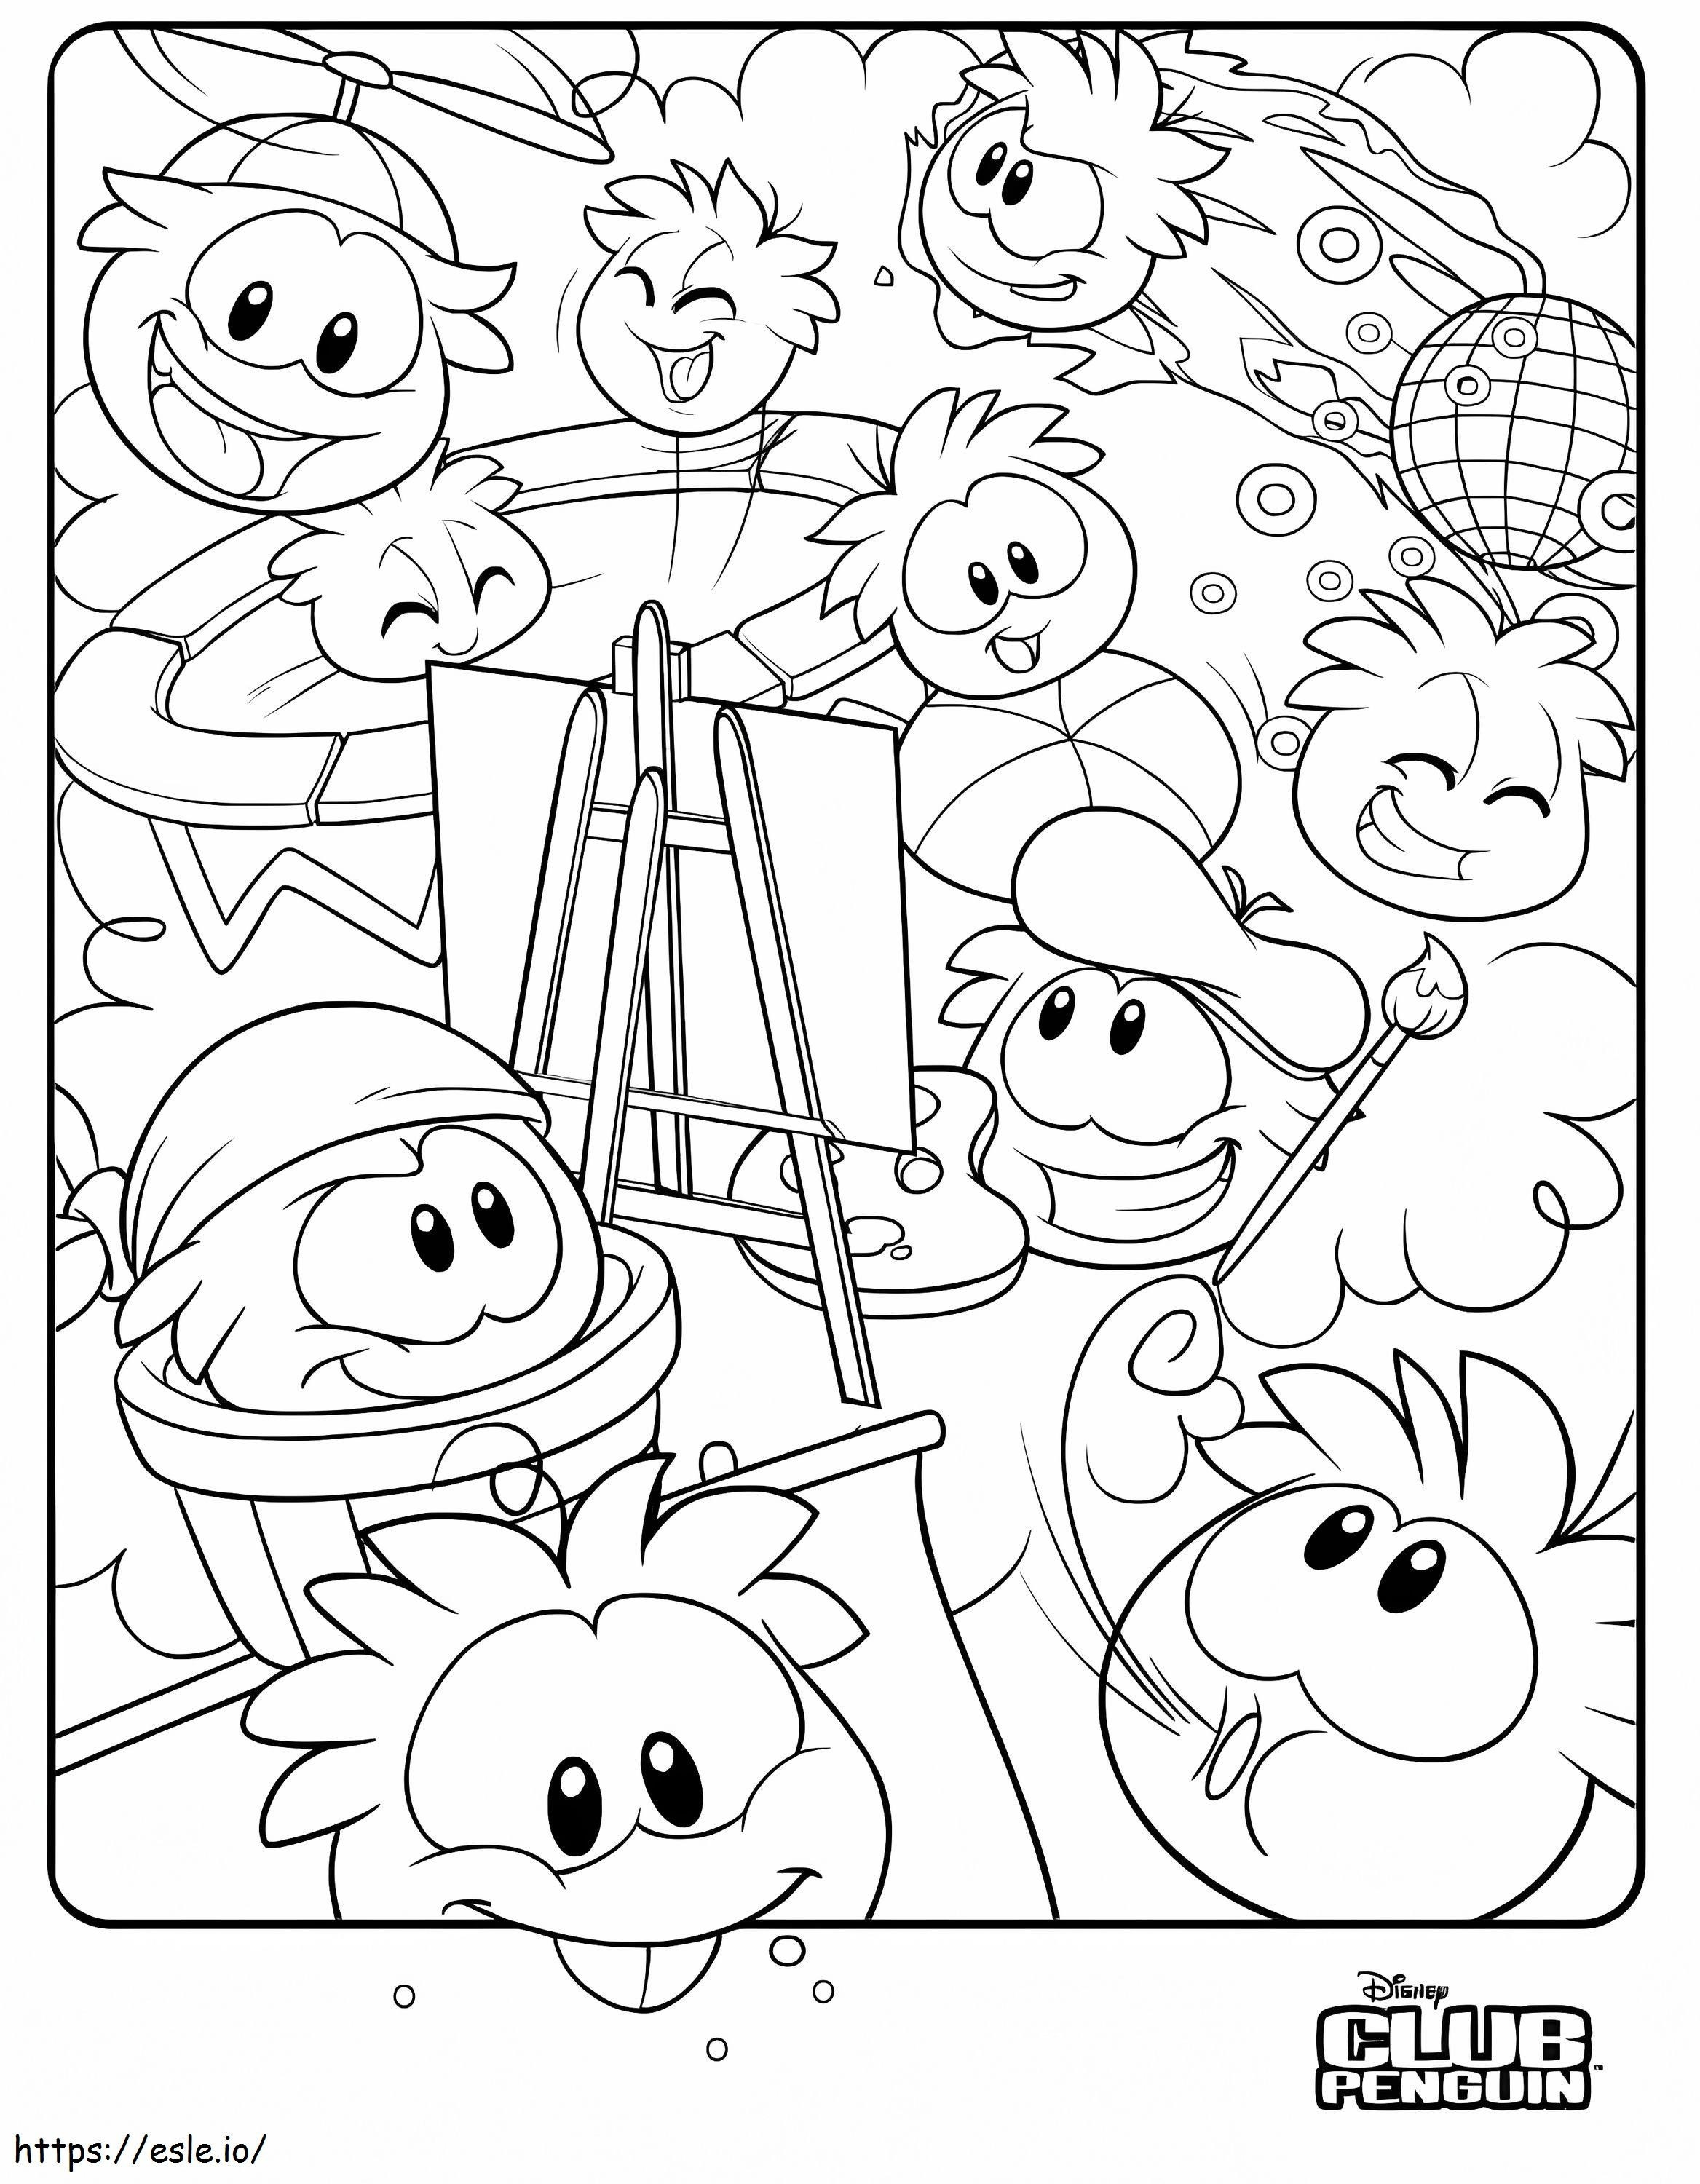 Club Penguin Puffles coloring page